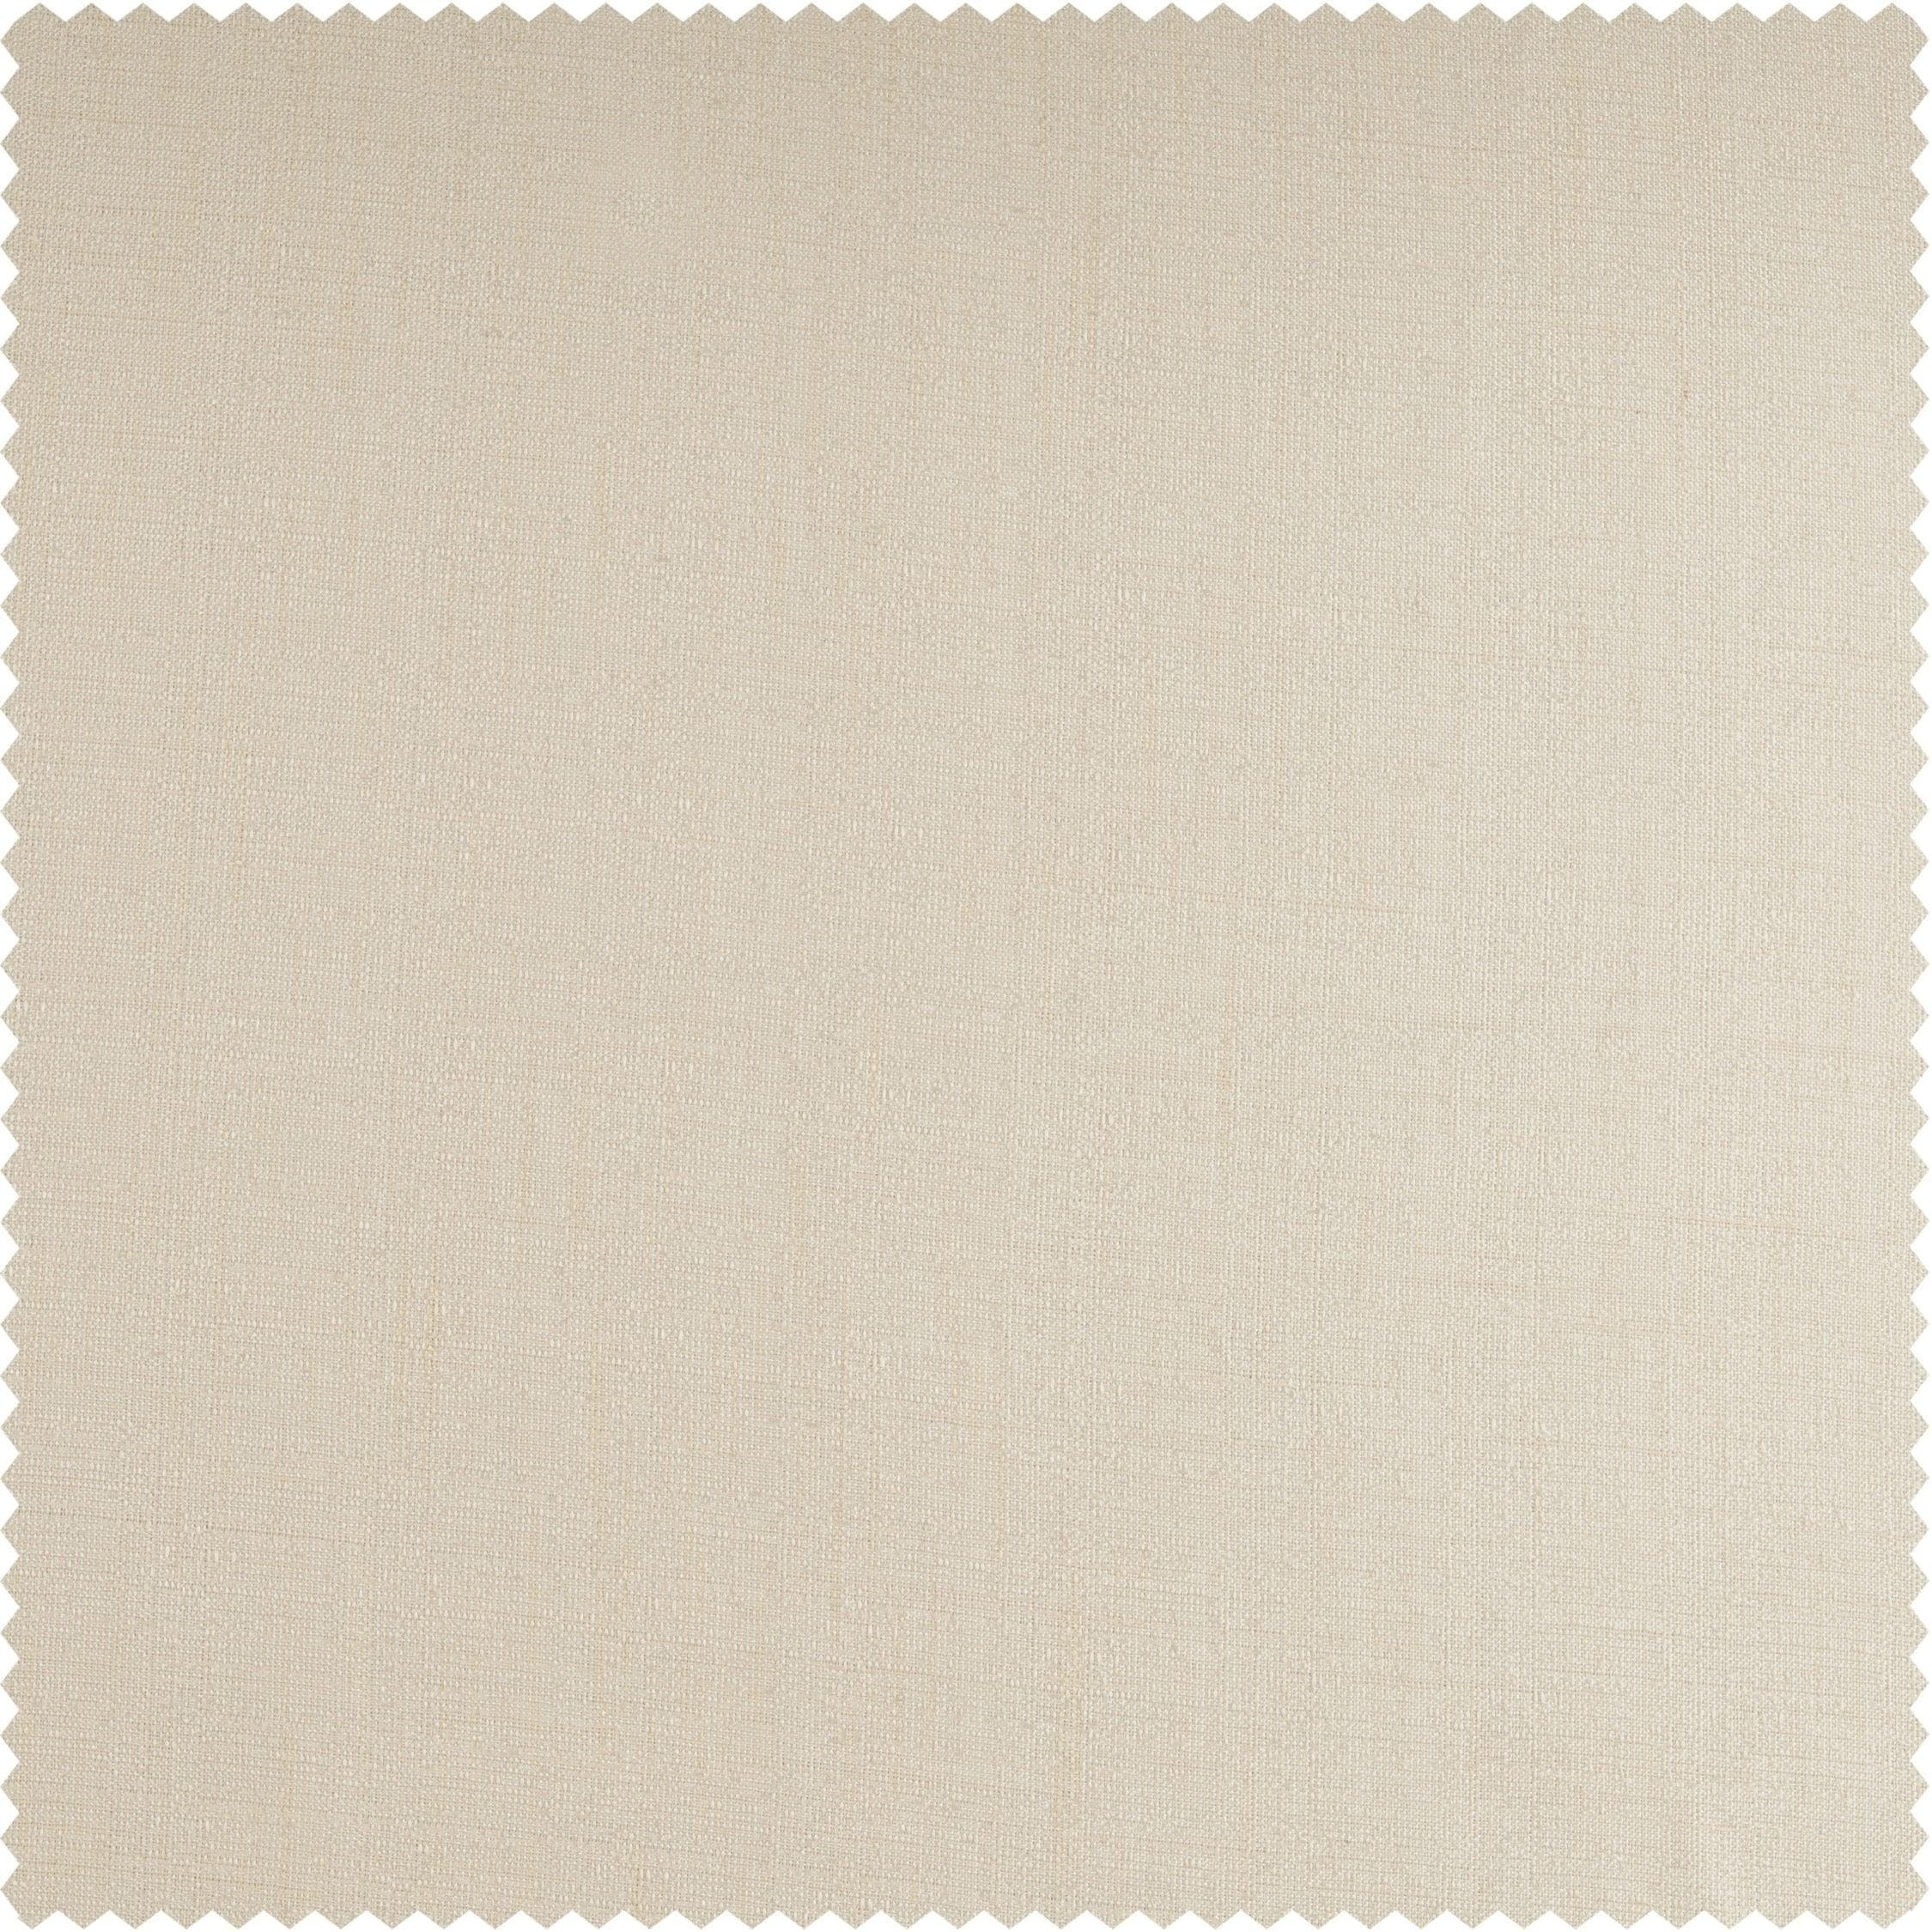 French Ivory Textured Faux Raw Silk Swatch